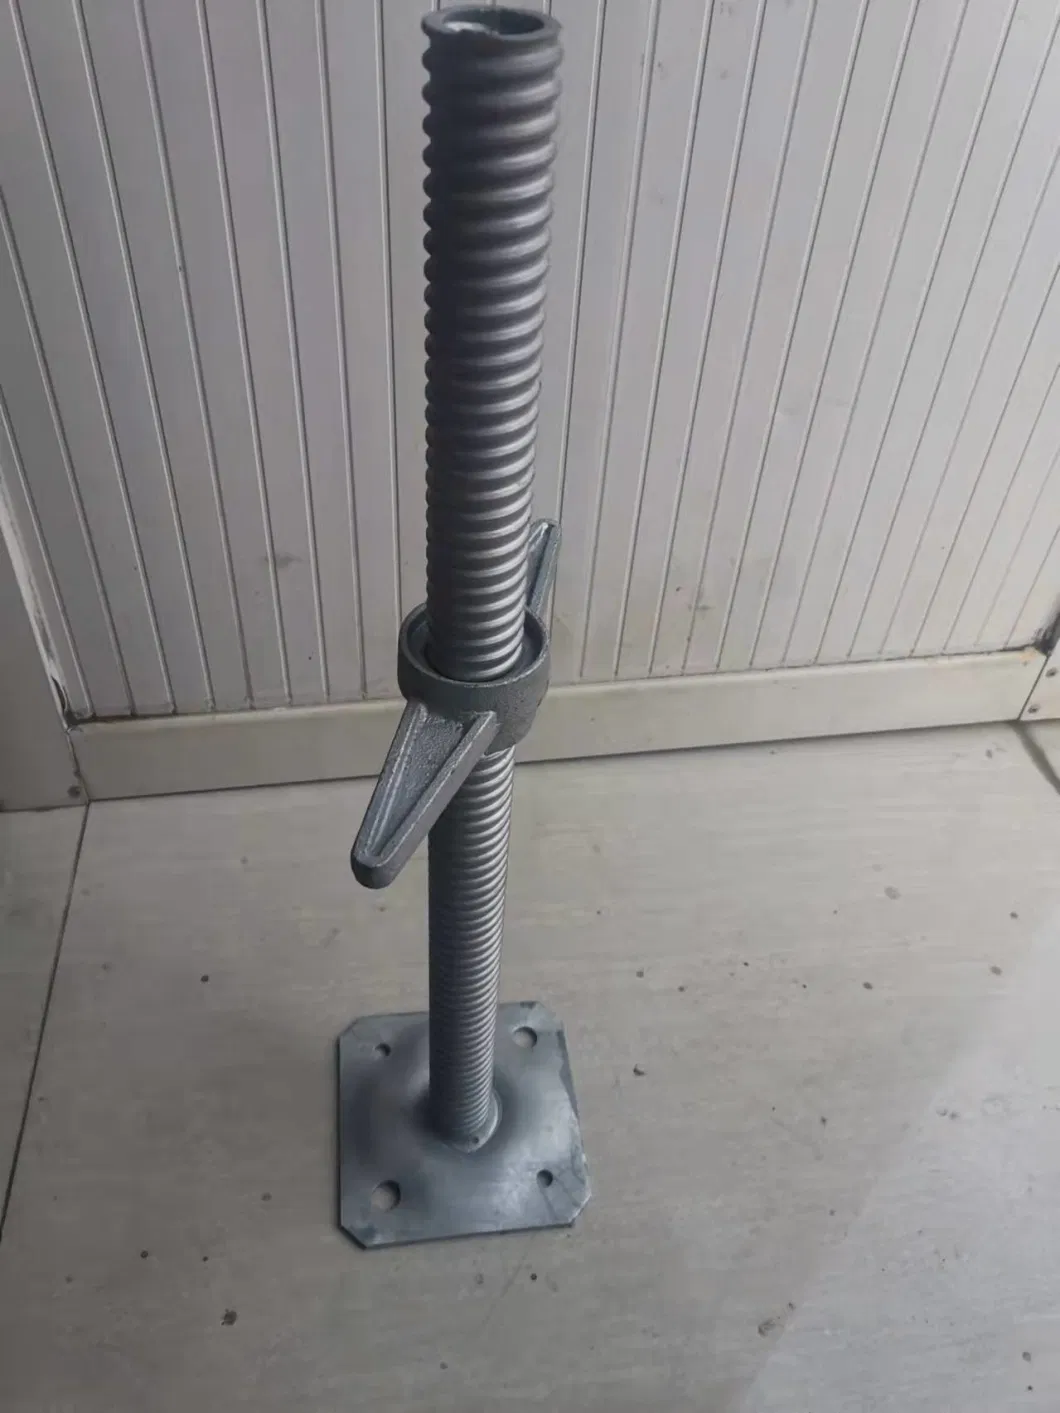 Height Adjustable Screw/Shoring Base Jack Plate/Levelling Feet/Legs for Construction Scaffolding